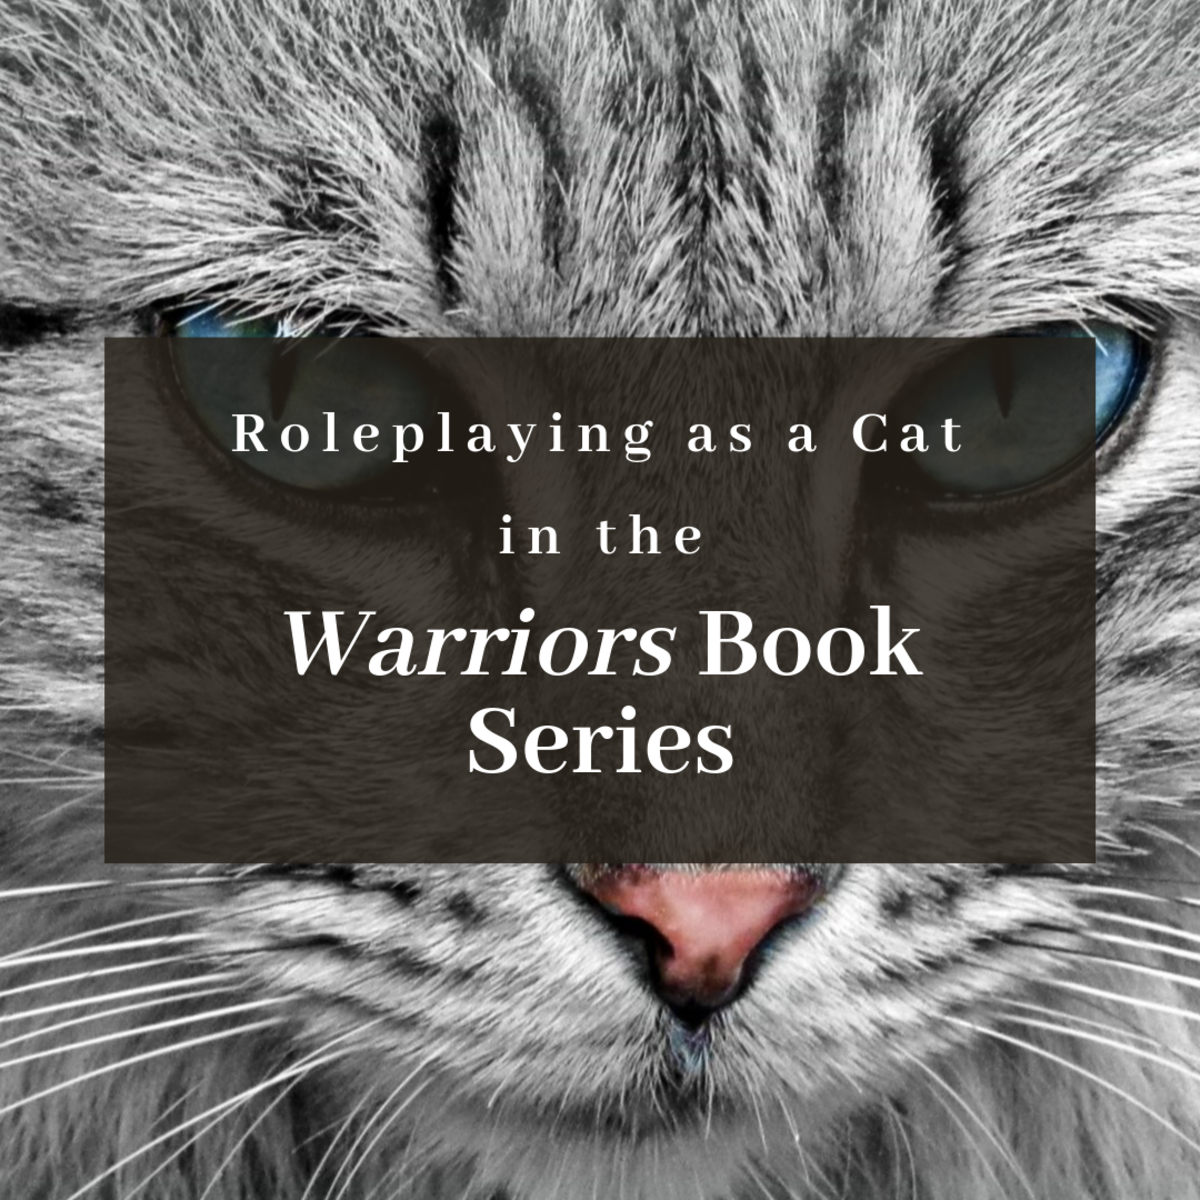 How To Roleplay As A Warrior Cat From The Warriors Book Series